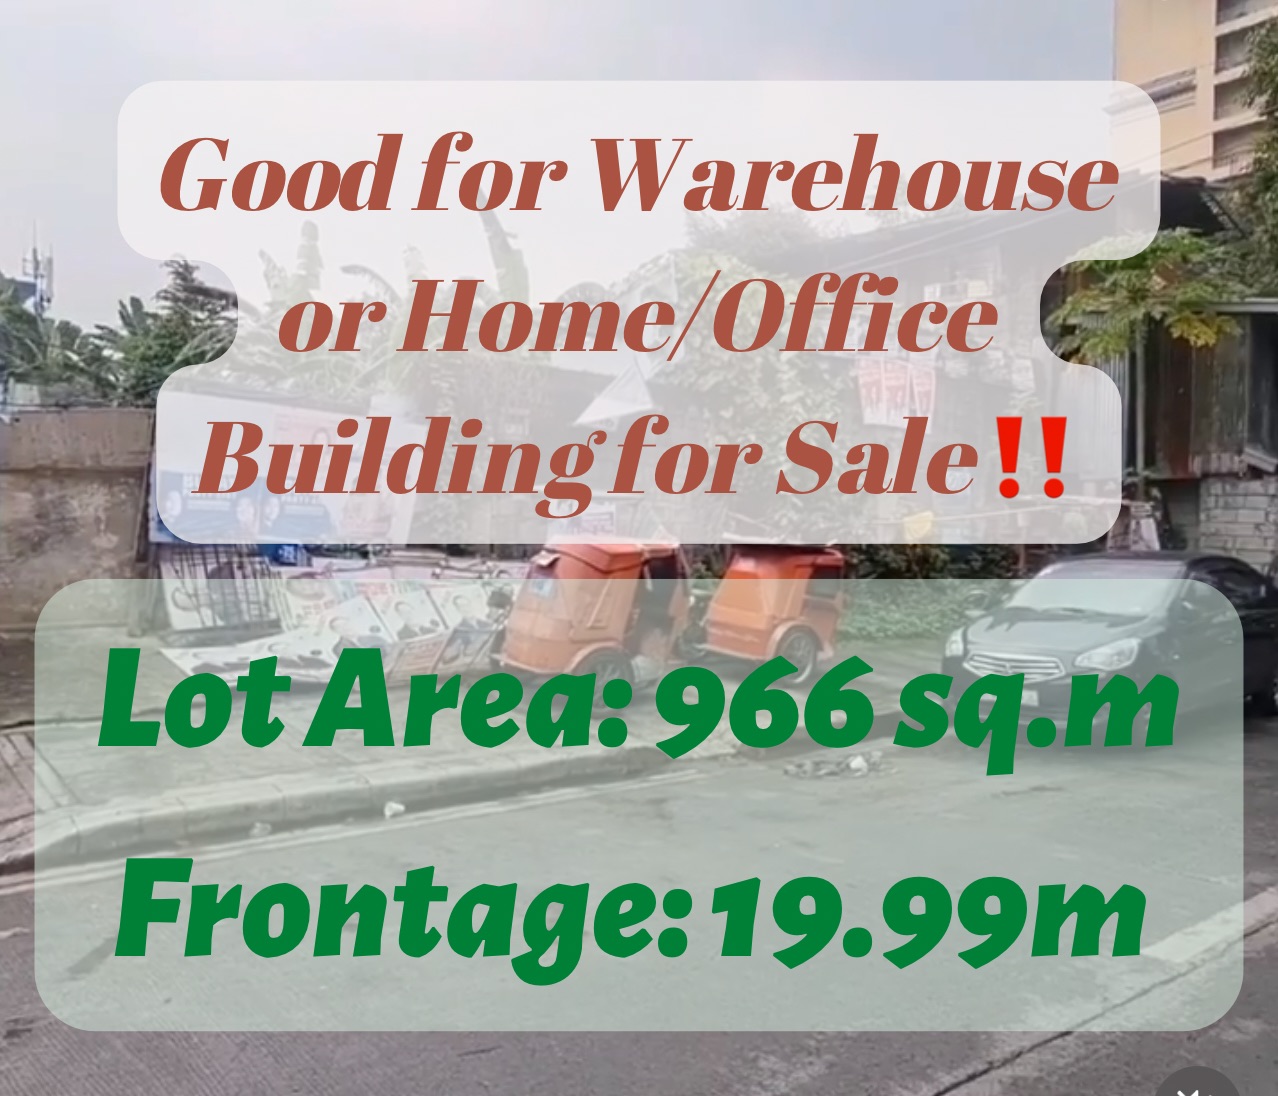 Good for Warehouse or Home/Office Building for Sale‼️